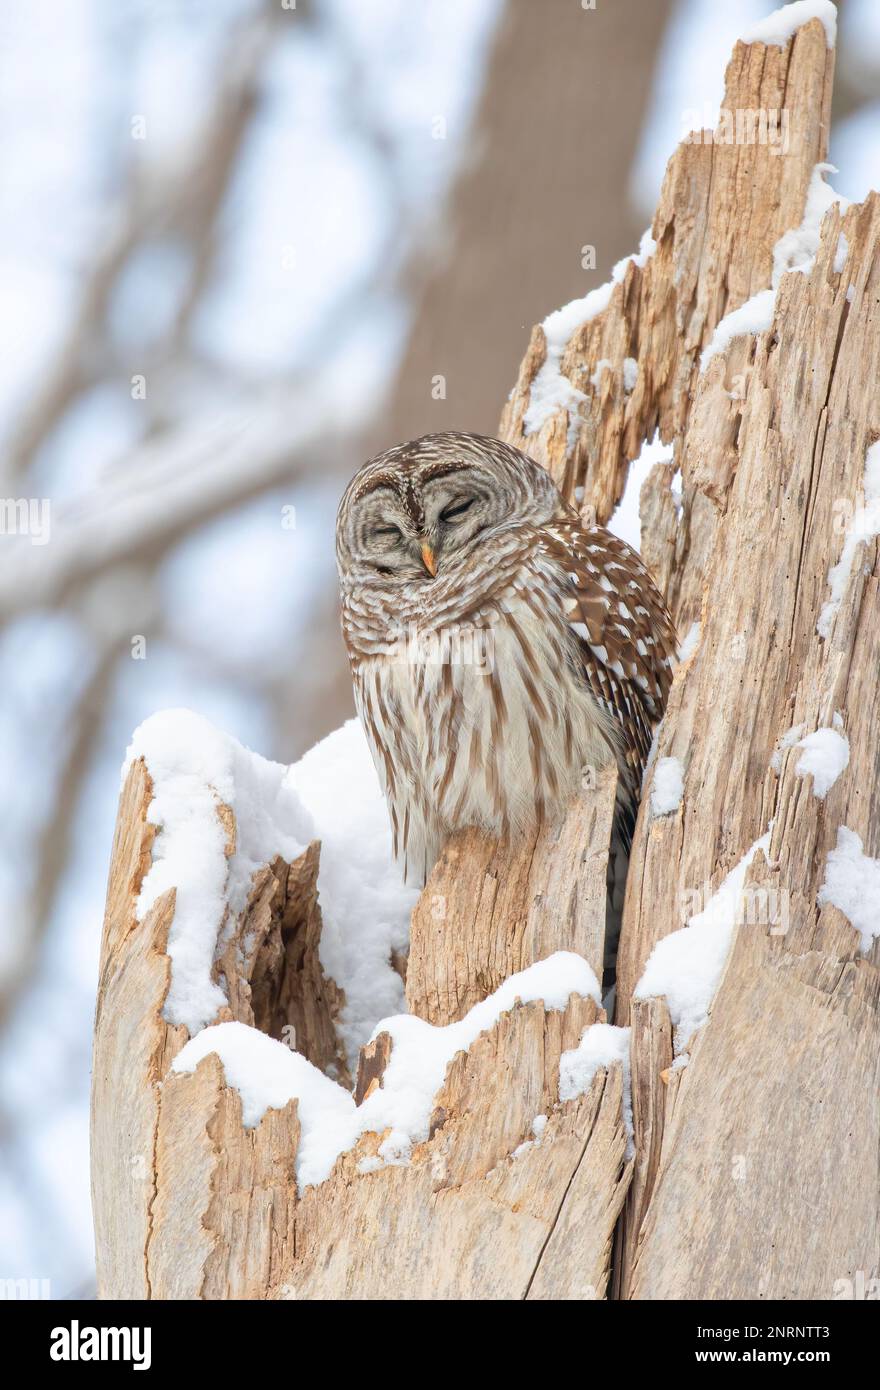 Barred owl (Strix varia) perched on a snow covered tree stump in winter in Canada Stock Photo